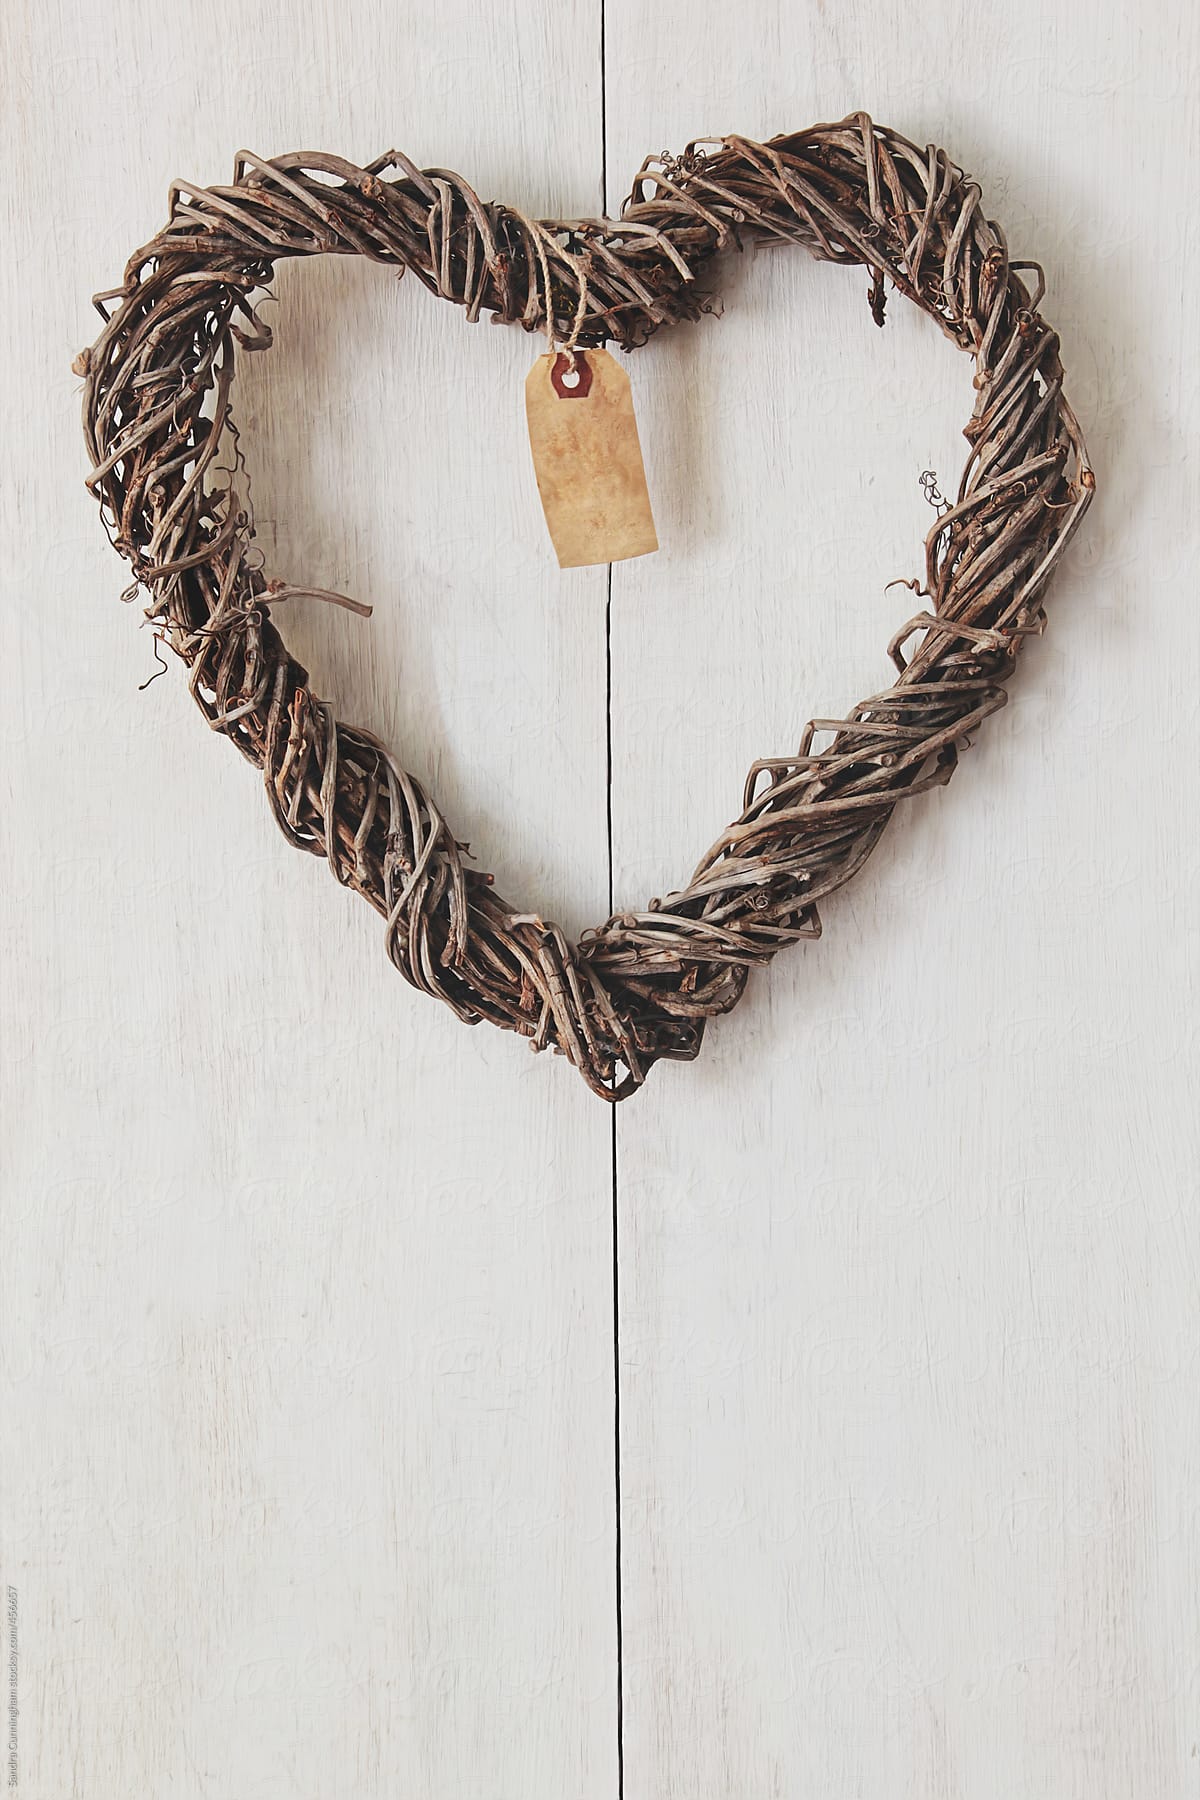 Heart wreath hanging on wood background